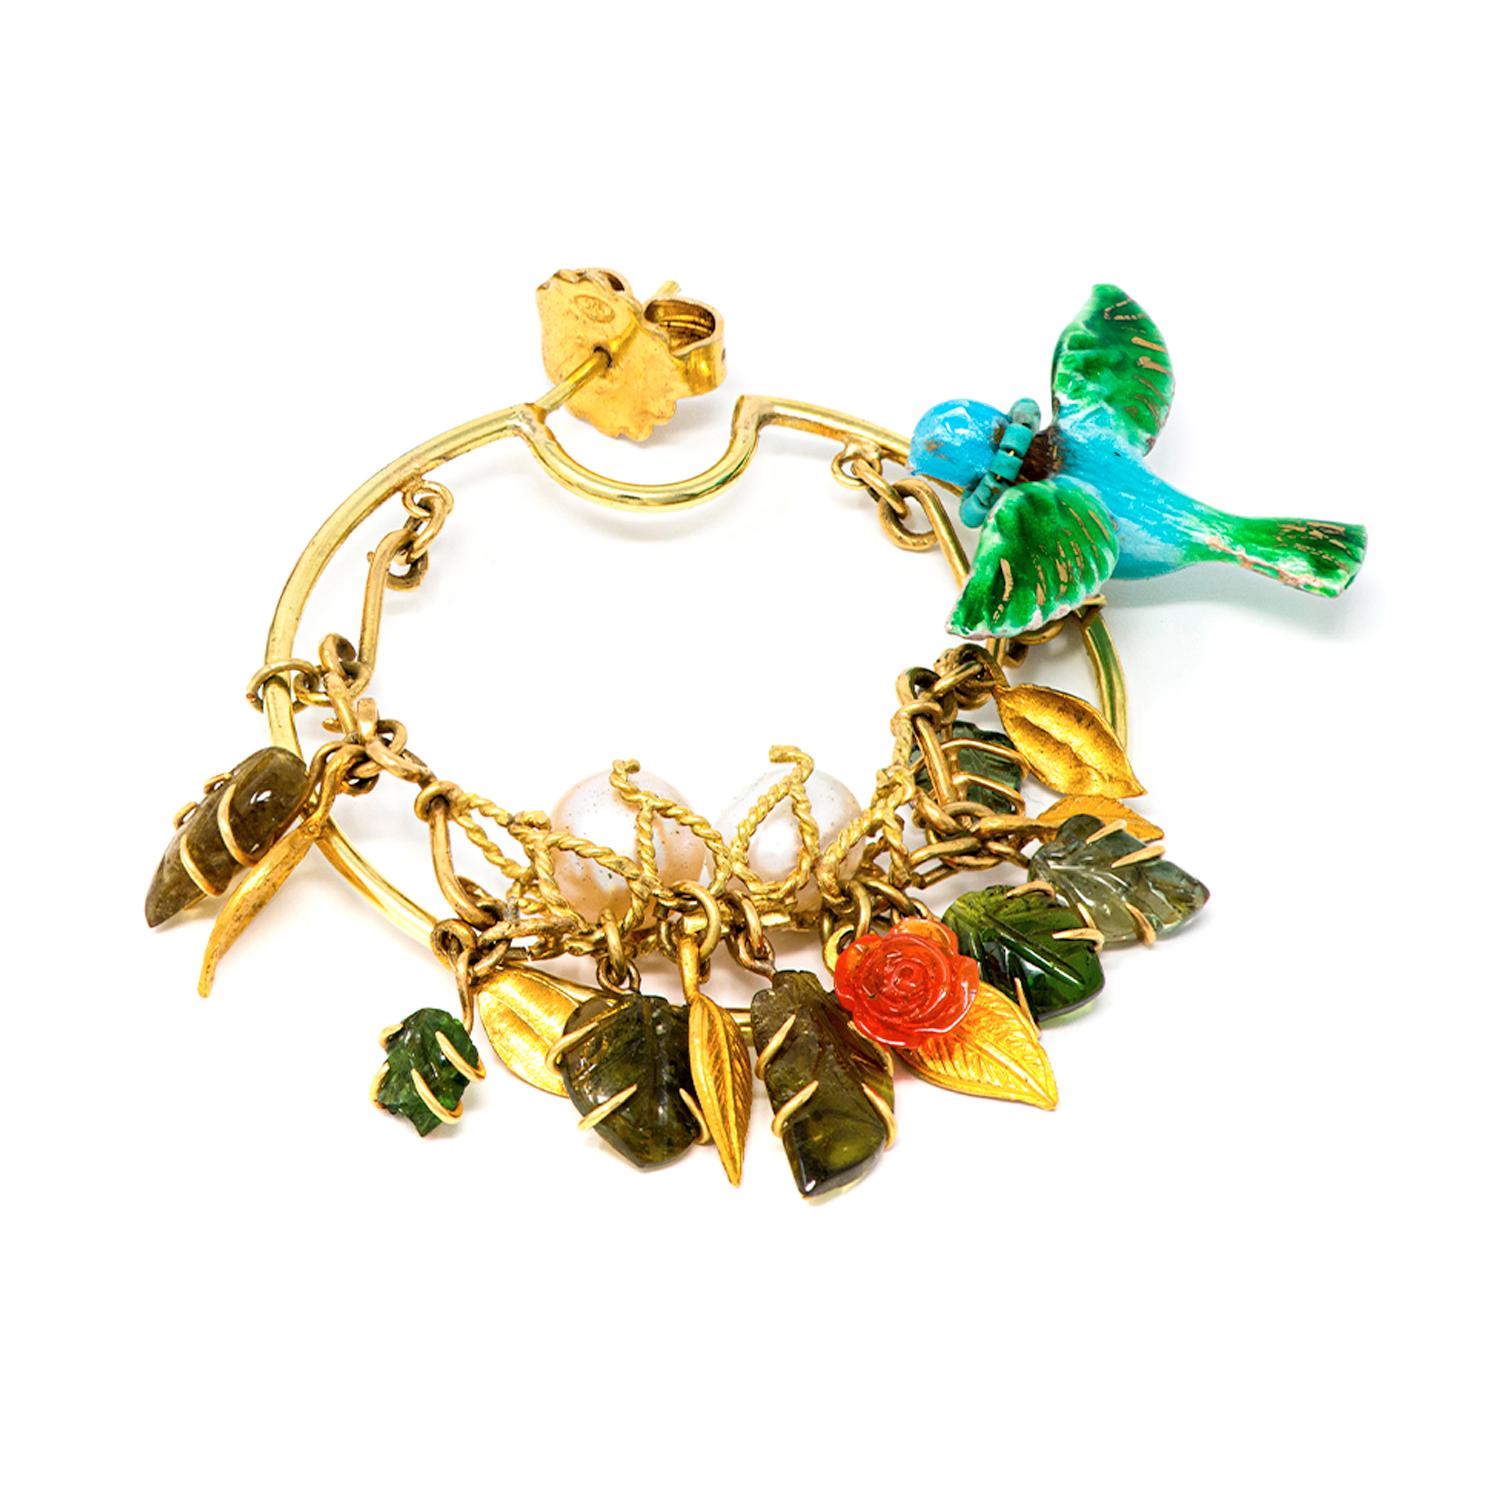 21st Century Tourmalines Fire Opals Roses Leaves Pearl Birds Gold Hoop Earring

Hoop Earrings in 18 Karat Yellow Gold, enameled Silver birds with turquoises necklace, Fire Opals carved as roses, Tourmalines carved as leaves and pearls.

Introducing